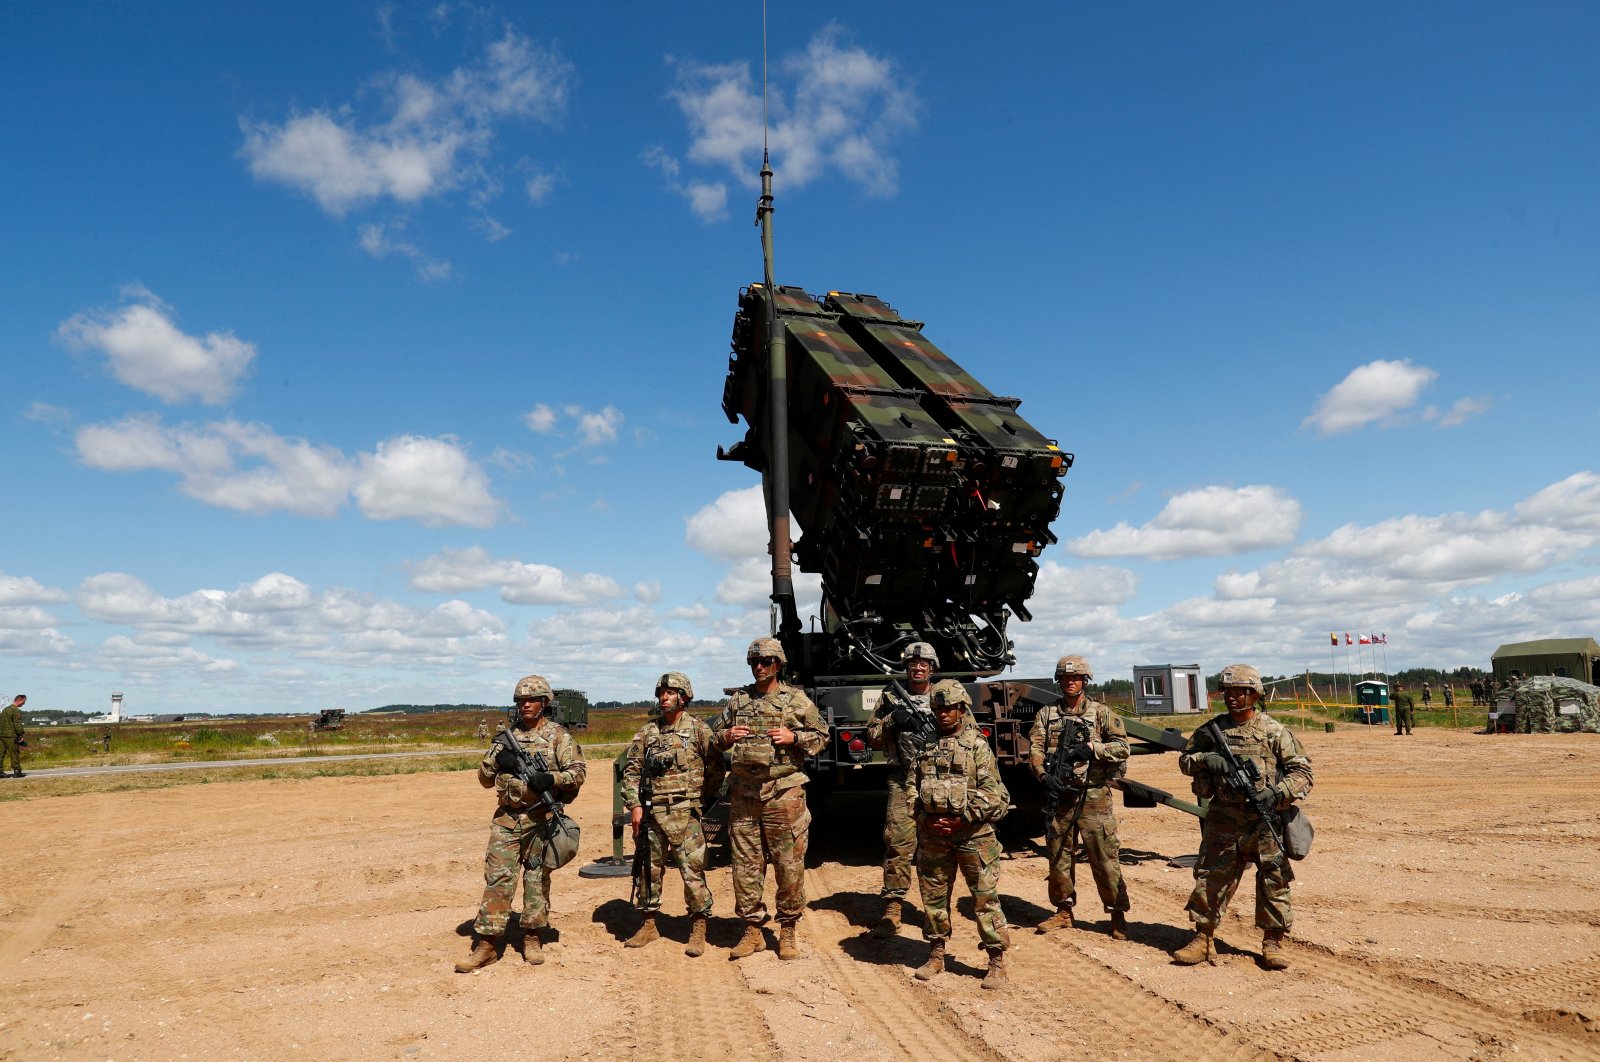 U.S. soldiers stand next to the long-range air defense system Patriot during Toburq Legacy 2017 air defense exercise in the military airfield near Siauliai, Lithuania, July 20, 2017. (Reuters File Photo)